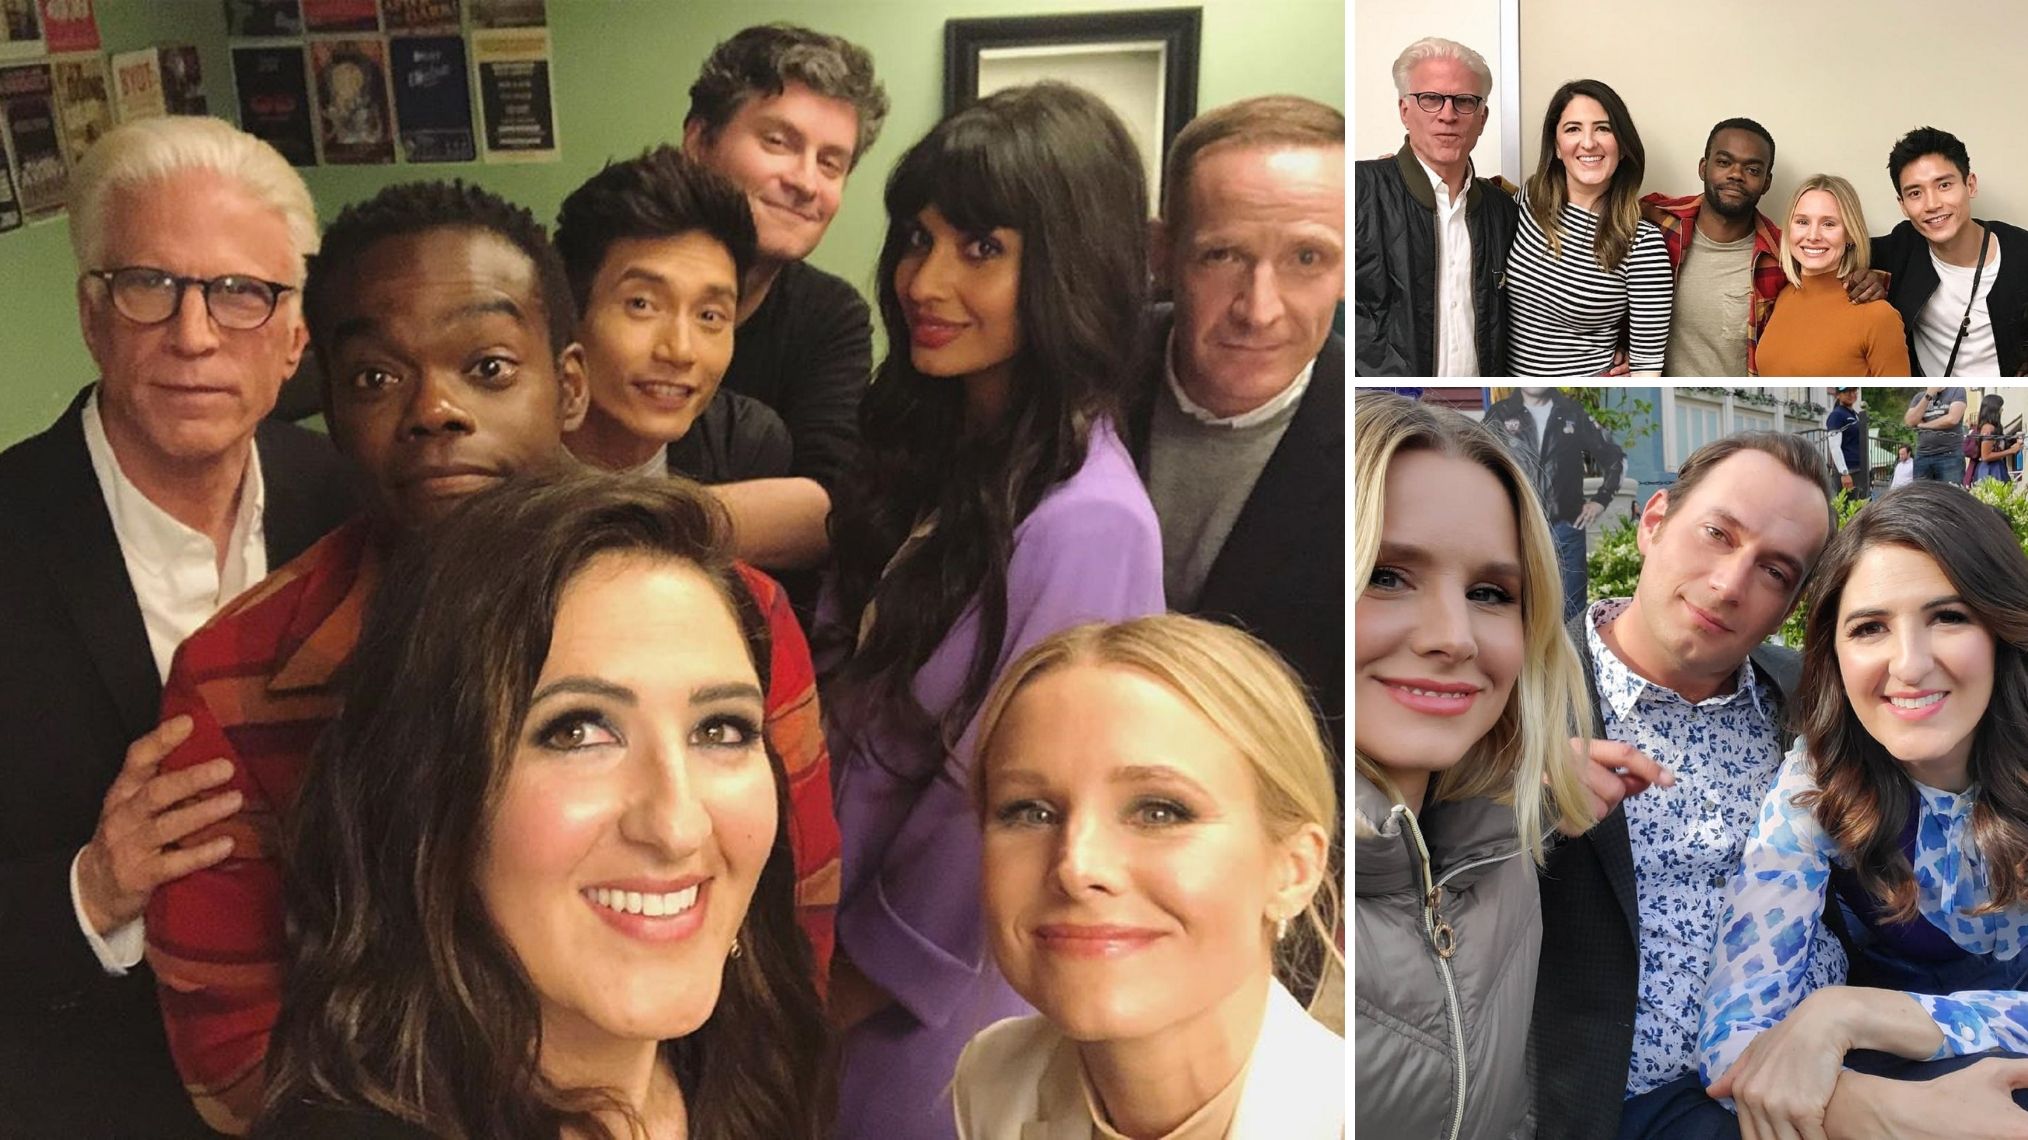 Behind the Scenes of the Final Season With the Cast (PHOTOS) – TV Insider ...